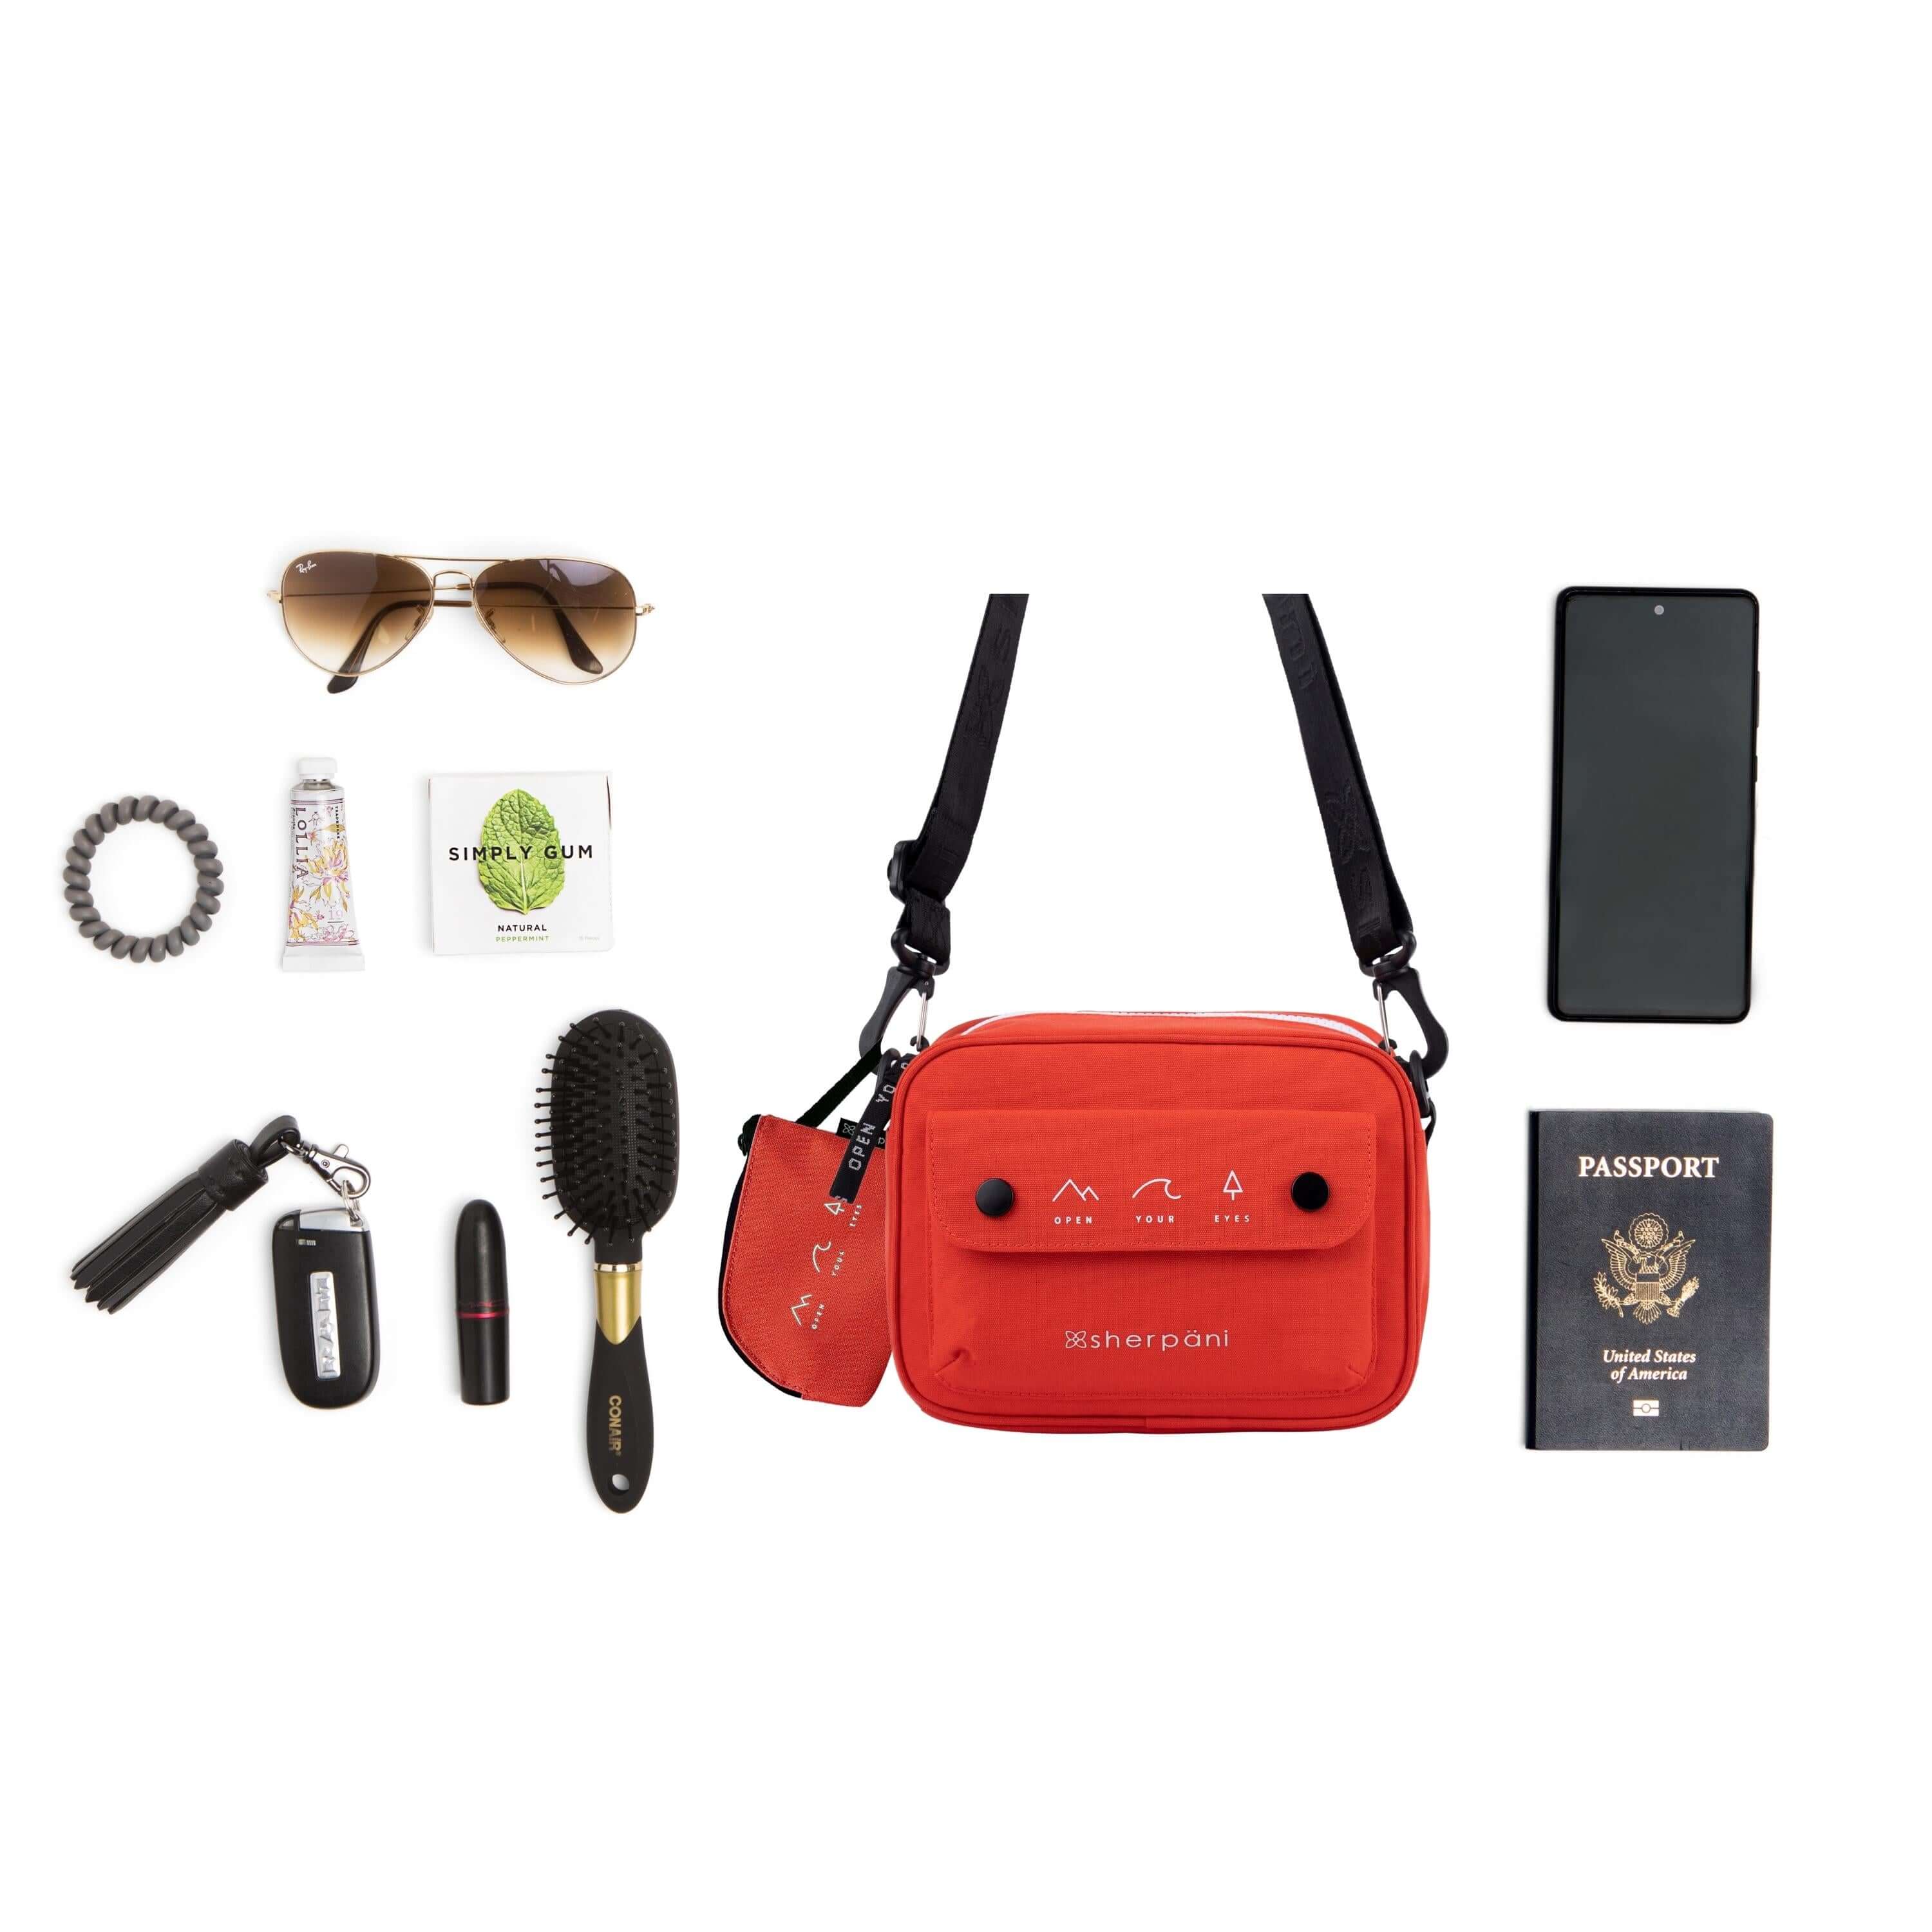 Top view of example items to fill the bag. Sherpani crossbody, the Osaka in Poppy, lies in the center. It is surrounded by an assortment of items: sunglasses, hair tie, hand lotion, gum, car key, lipstick, hairbrush, phone and passport.